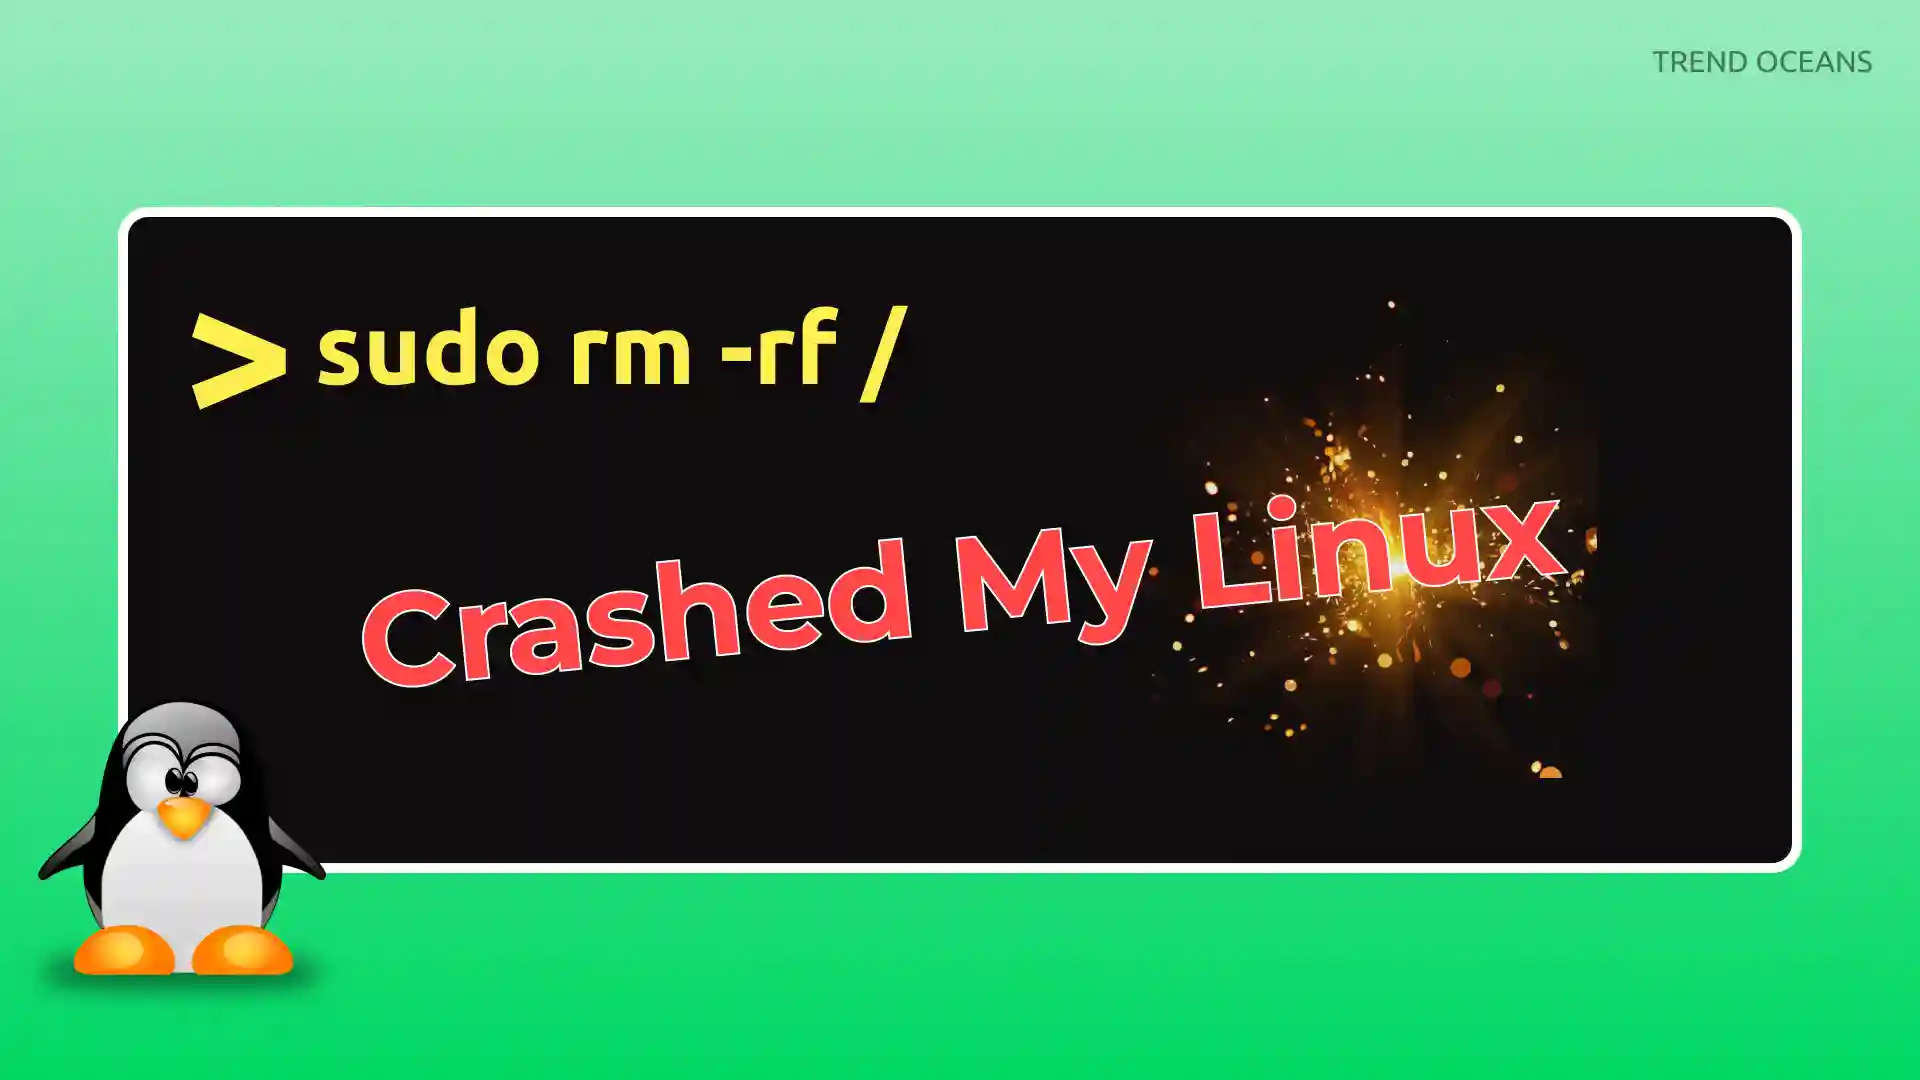 What will happen if I run “sudo rm -rf /” on Linux?